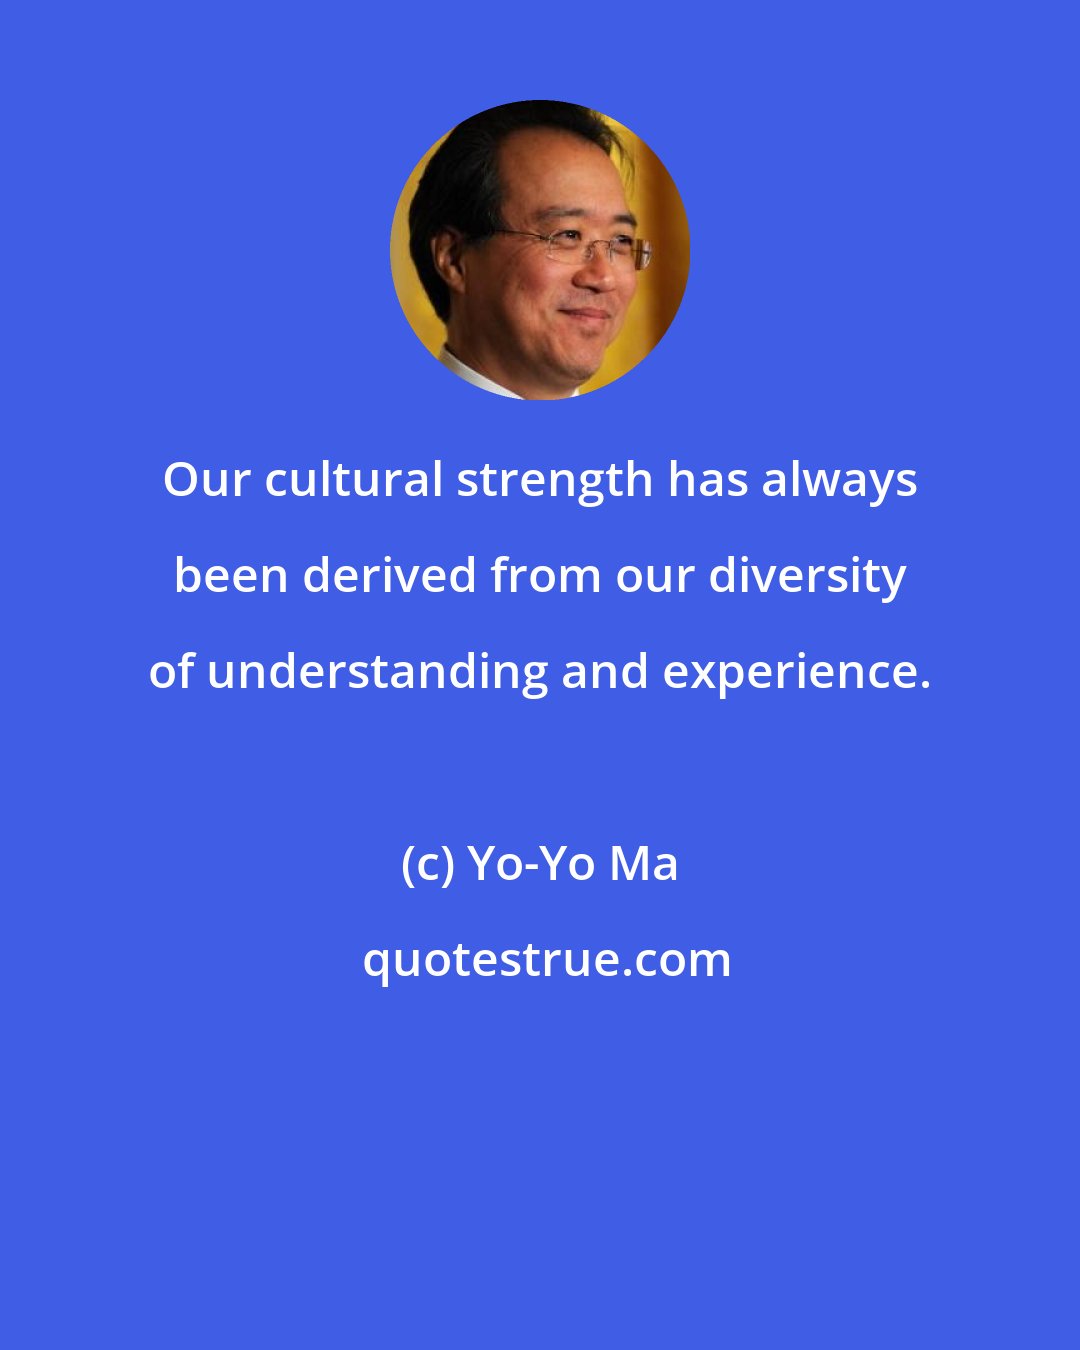 Yo-Yo Ma: Our cultural strength has always been derived from our diversity of understanding and experience.